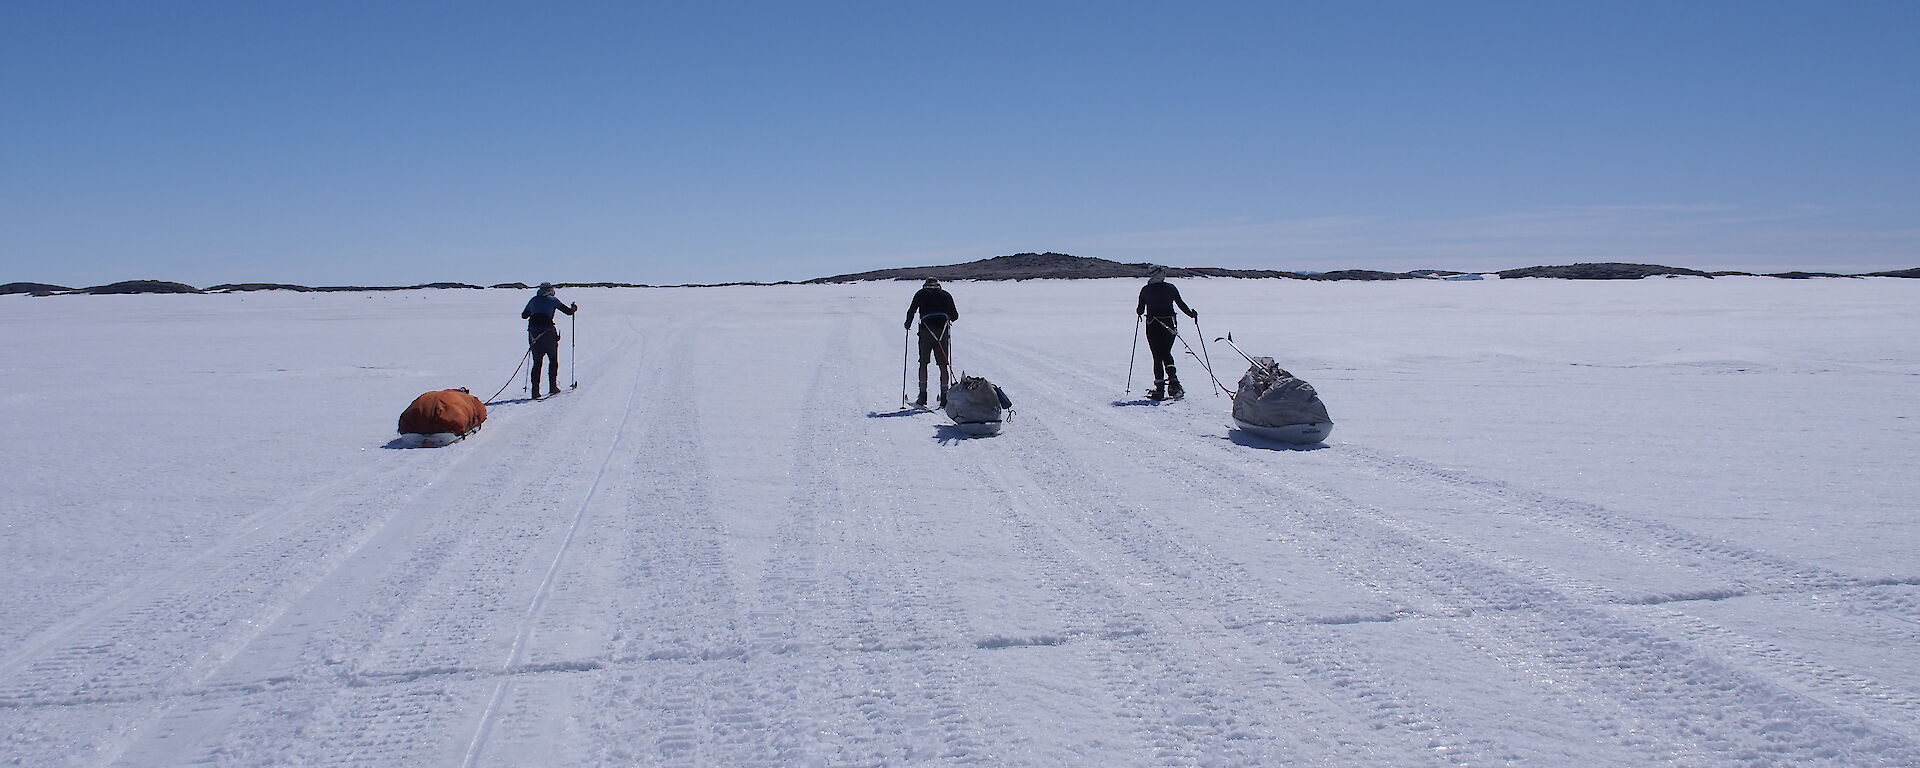 Three expeditioners pulling sleds of gear on the sea ice across to an island